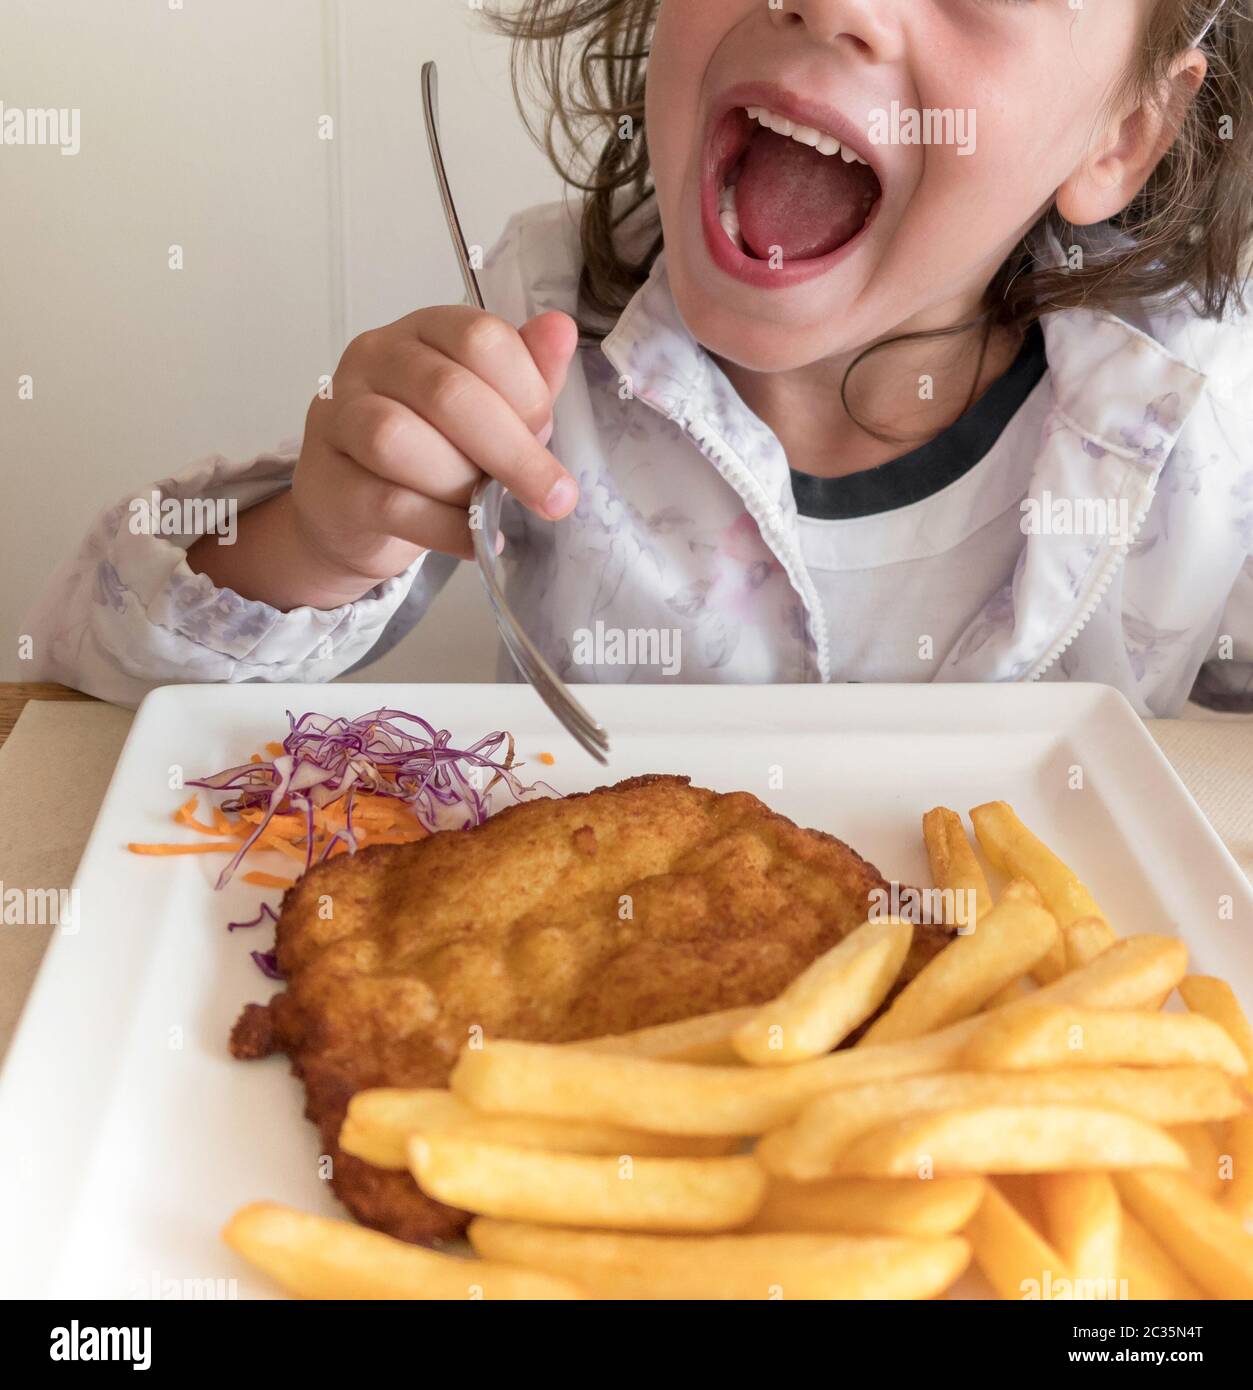 Little Italian girl eating breaded meat and french fries Stock Photo